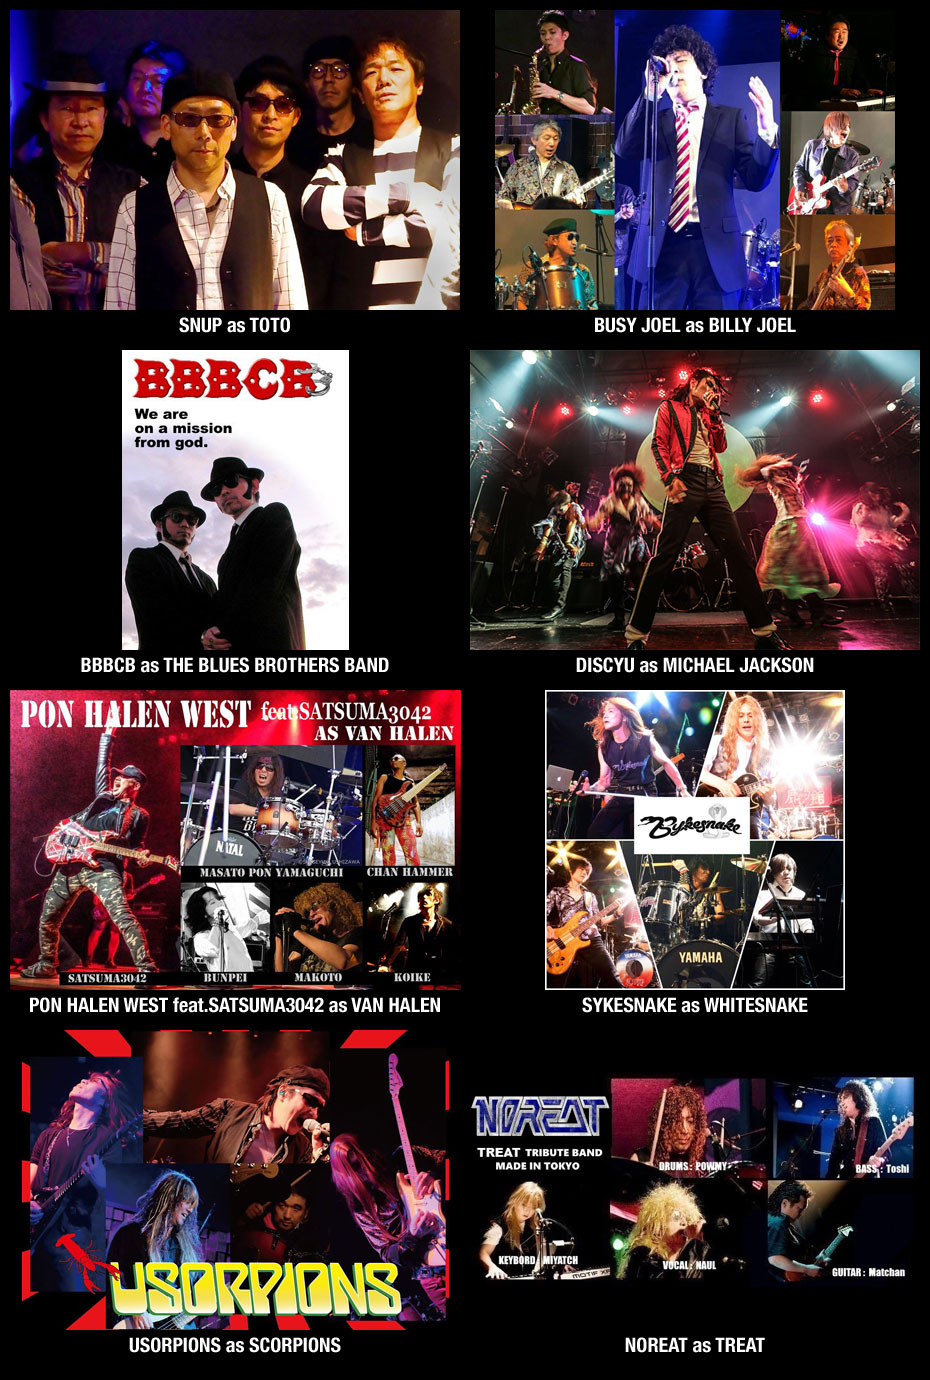 ■MUSIC LIFE CLUB presents
LEGEND OF ROCK NEW YEAR SPECIAL '20